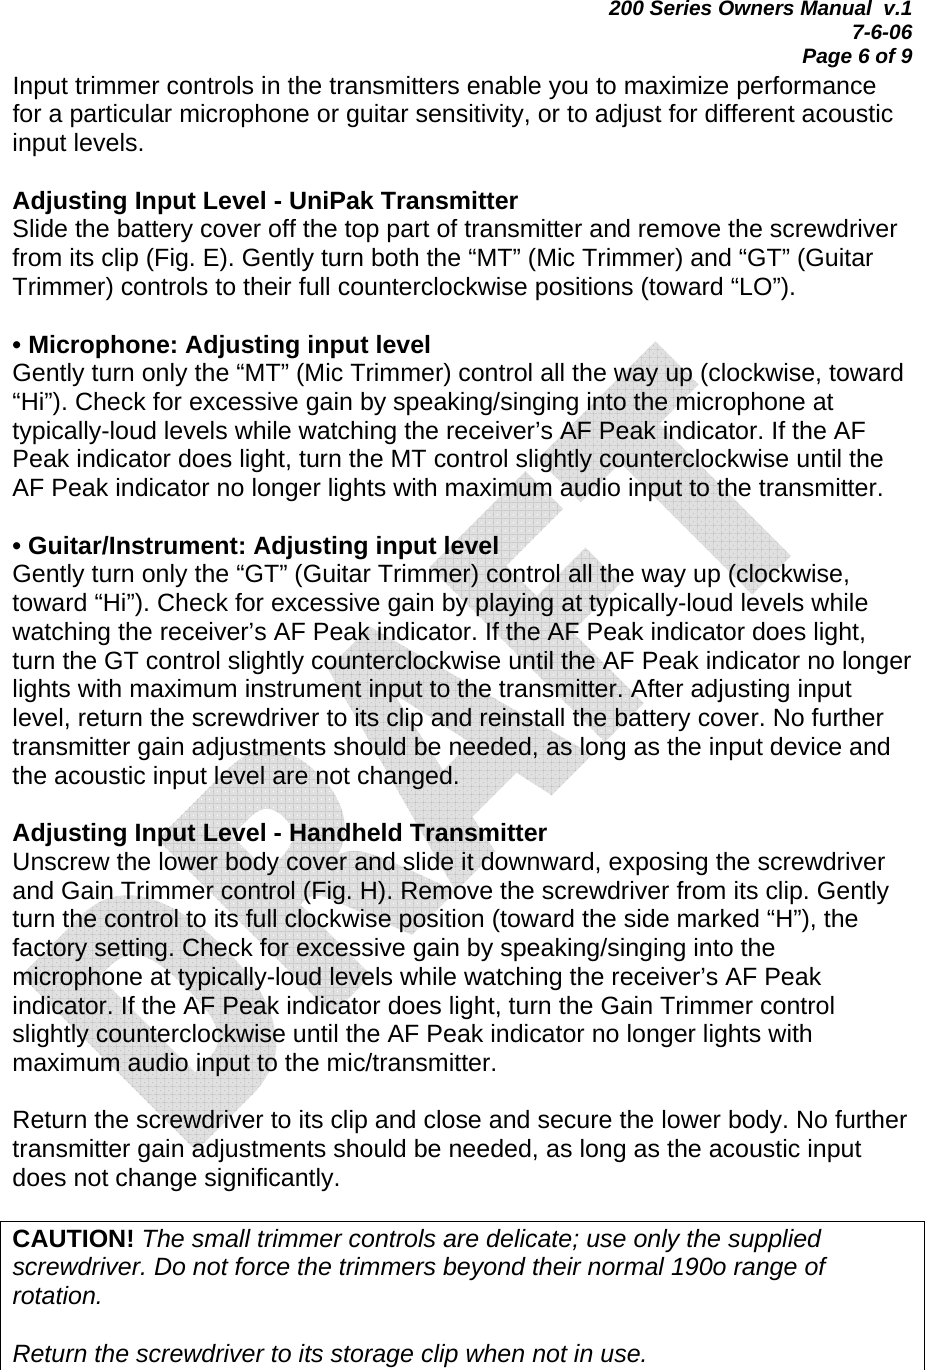 200 Series Owners Manual  v.1 7-6-06 Page 6 of 9 Input trimmer controls in the transmitters enable you to maximize performance for a particular microphone or guitar sensitivity, or to adjust for different acoustic input levels.  Adjusting Input Level - UniPak Transmitter Slide the battery cover off the top part of transmitter and remove the screwdriver from its clip (Fig. E). Gently turn both the “MT” (Mic Trimmer) and “GT” (Guitar Trimmer) controls to their full counterclockwise positions (toward “LO”).  • Microphone: Adjusting input level Gently turn only the “MT” (Mic Trimmer) control all the way up (clockwise, toward “Hi”). Check for excessive gain by speaking/singing into the microphone at typically-loud levels while watching the receiver’s AF Peak indicator. If the AF Peak indicator does light, turn the MT control slightly counterclockwise until the AF Peak indicator no longer lights with maximum audio input to the transmitter.  • Guitar/Instrument: Adjusting input level Gently turn only the “GT” (Guitar Trimmer) control all the way up (clockwise, toward “Hi”). Check for excessive gain by playing at typically-loud levels while watching the receiver’s AF Peak indicator. If the AF Peak indicator does light, turn the GT control slightly counterclockwise until the AF Peak indicator no longer lights with maximum instrument input to the transmitter. After adjusting input level, return the screwdriver to its clip and reinstall the battery cover. No further transmitter gain adjustments should be needed, as long as the input device and the acoustic input level are not changed.  Adjusting Input Level - Handheld Transmitter Unscrew the lower body cover and slide it downward, exposing the screwdriver and Gain Trimmer control (Fig. H). Remove the screwdriver from its clip. Gently turn the control to its full clockwise position (toward the side marked “H”), the factory setting. Check for excessive gain by speaking/singing into the microphone at typically-loud levels while watching the receiver’s AF Peak indicator. If the AF Peak indicator does light, turn the Gain Trimmer control slightly counterclockwise until the AF Peak indicator no longer lights with maximum audio input to the mic/transmitter.  Return the screwdriver to its clip and close and secure the lower body. No further transmitter gain adjustments should be needed, as long as the acoustic input does not change significantly.  CAUTION! The small trimmer controls are delicate; use only the supplied screwdriver. Do not force the trimmers beyond their normal 190o range of rotation.   Return the screwdriver to its storage clip when not in use.  